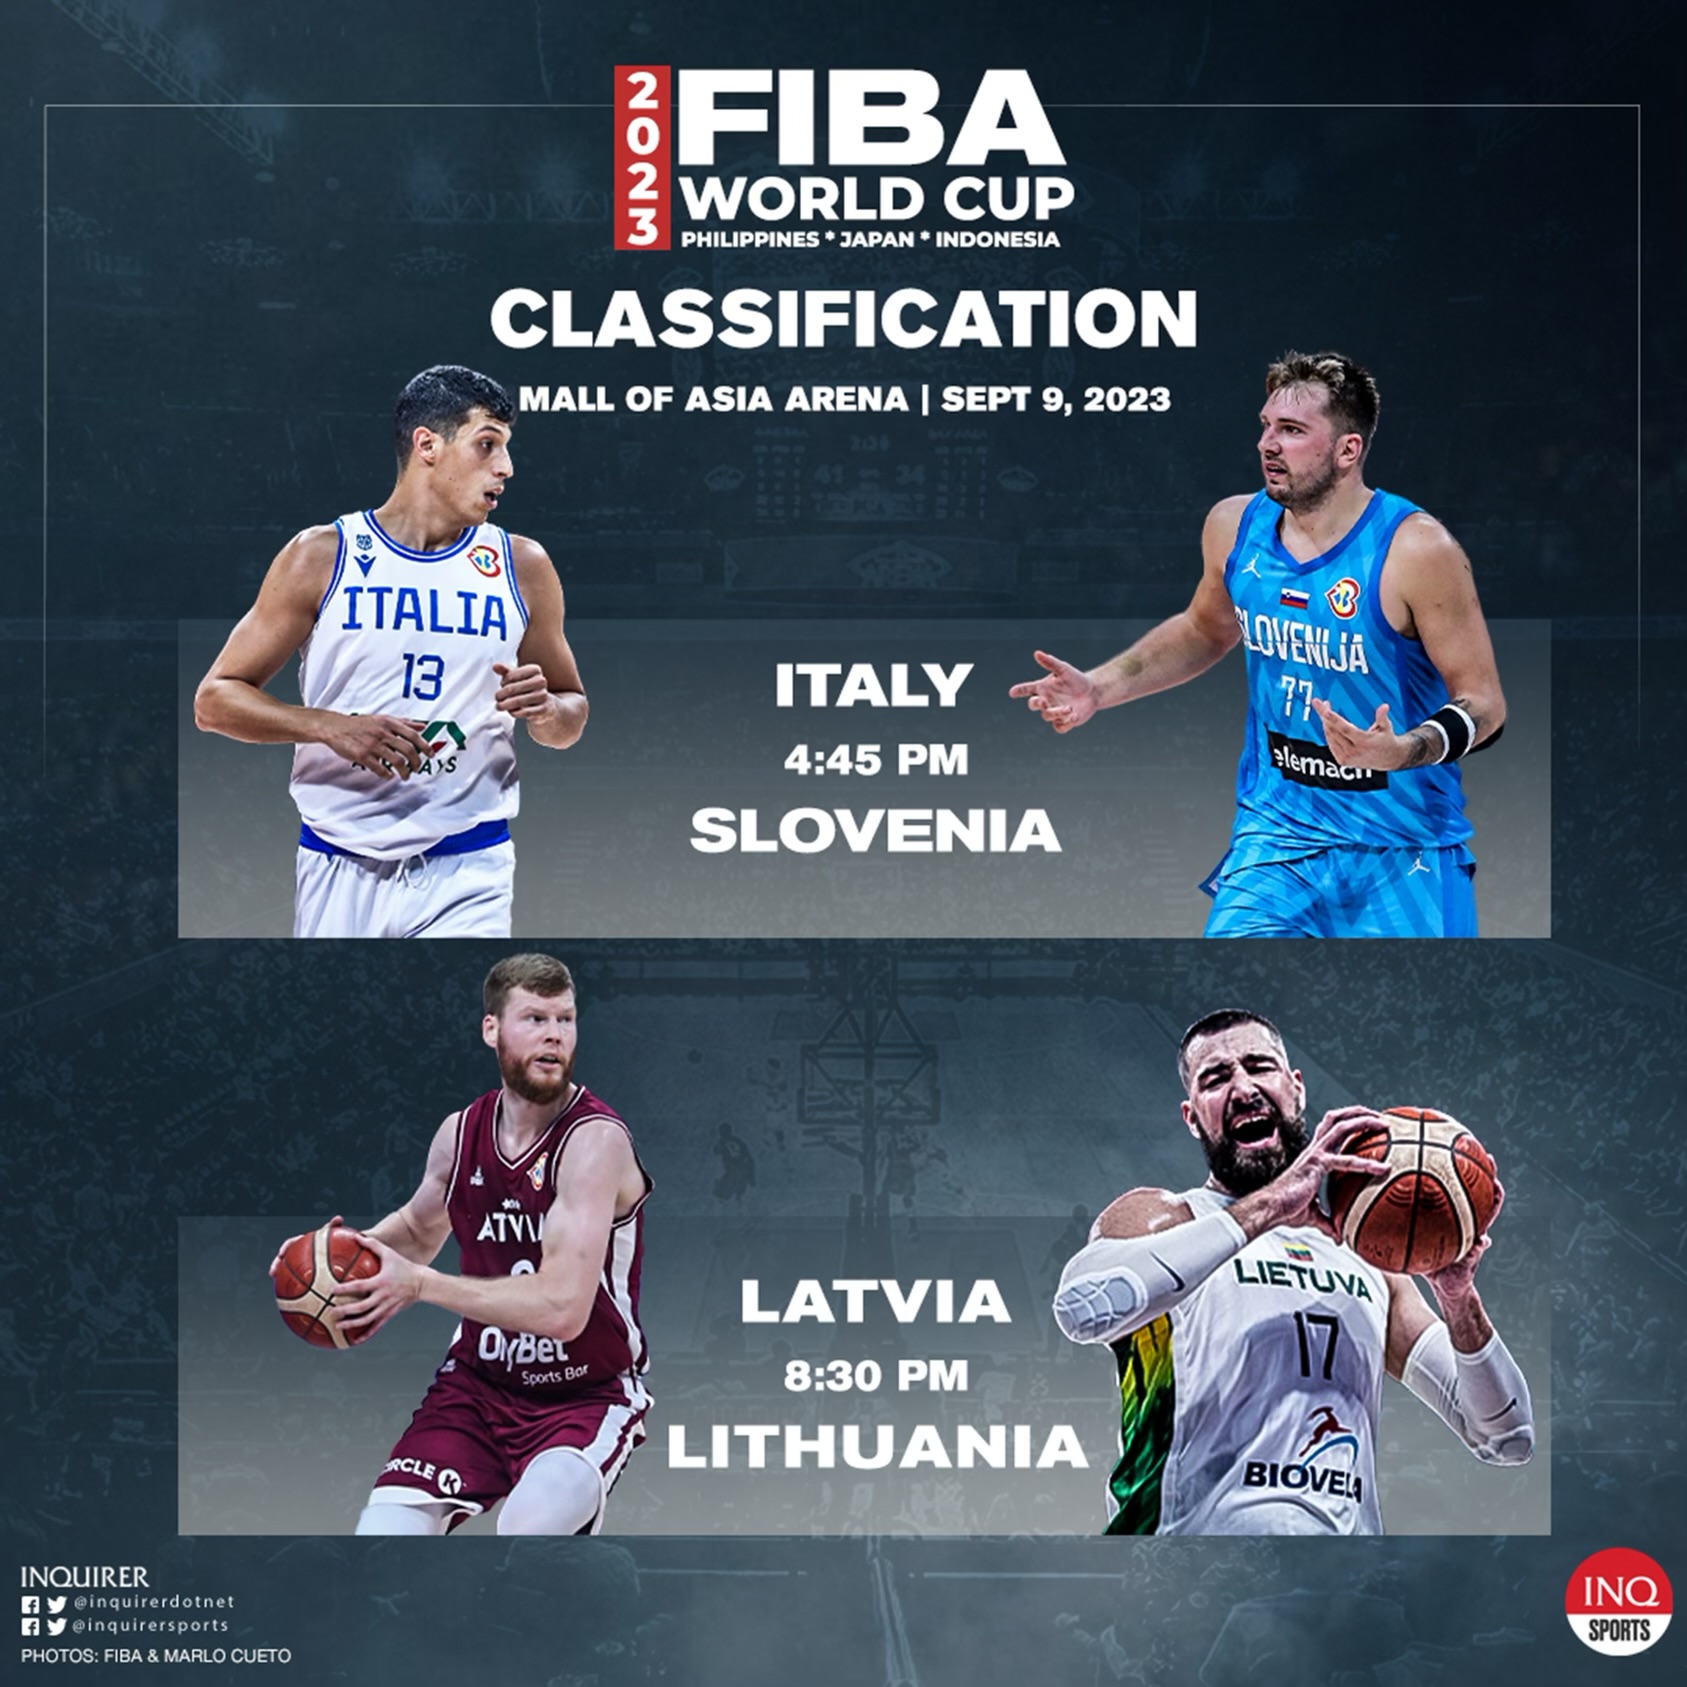 classification schedule places 5-8 Fiba World Cup